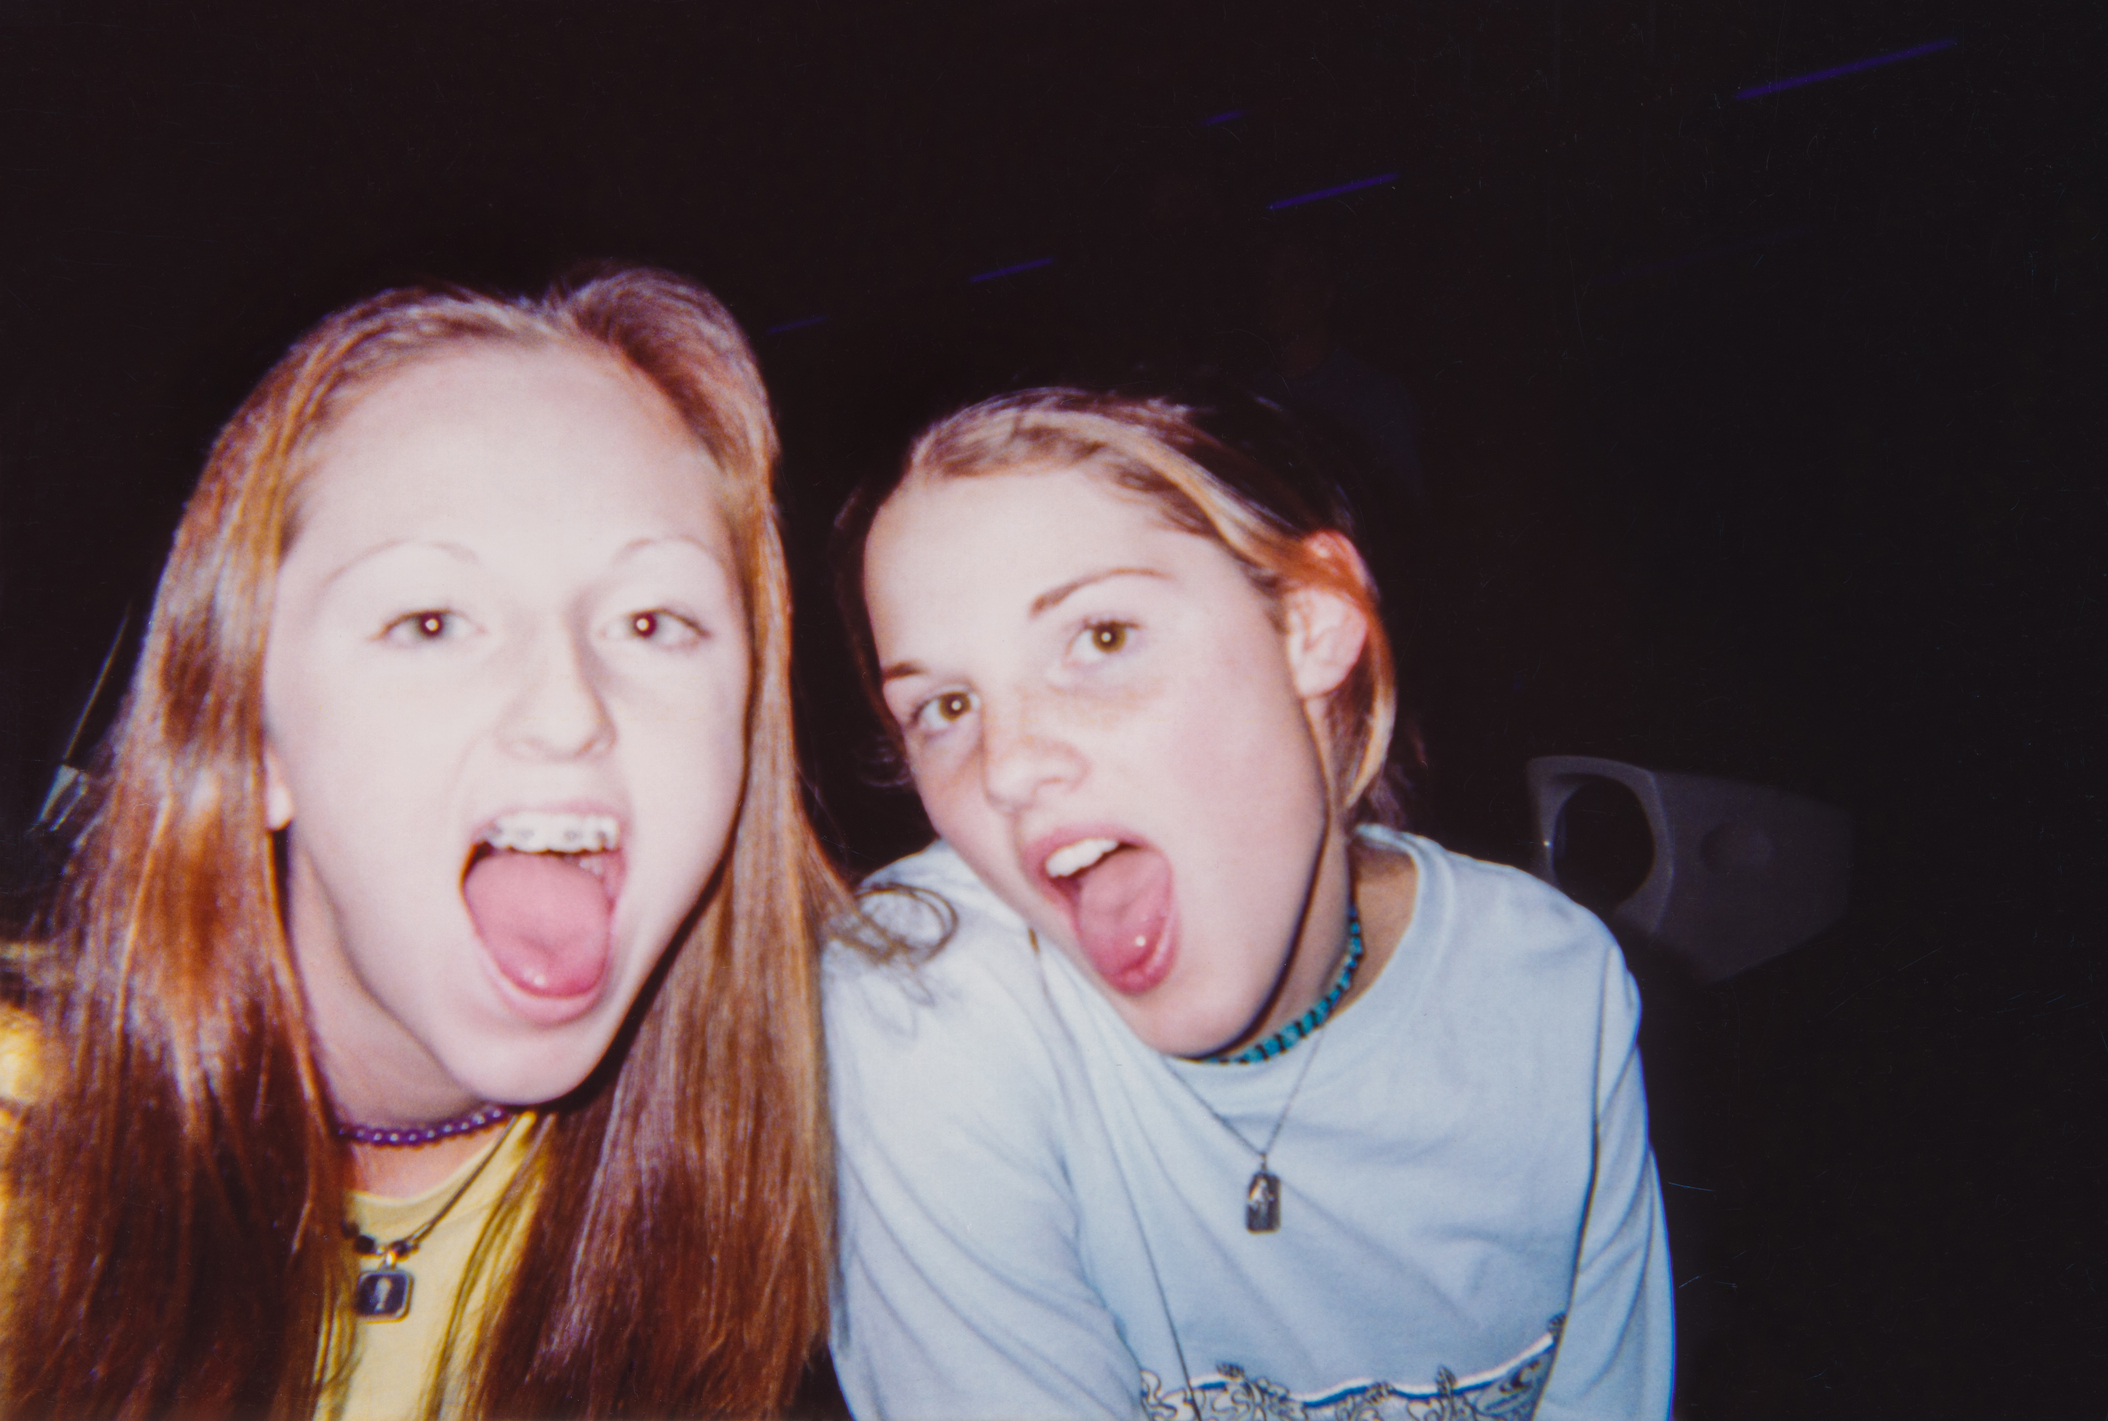 Two girls sticking out their tongues, wearing casual tops and beaded necklaces